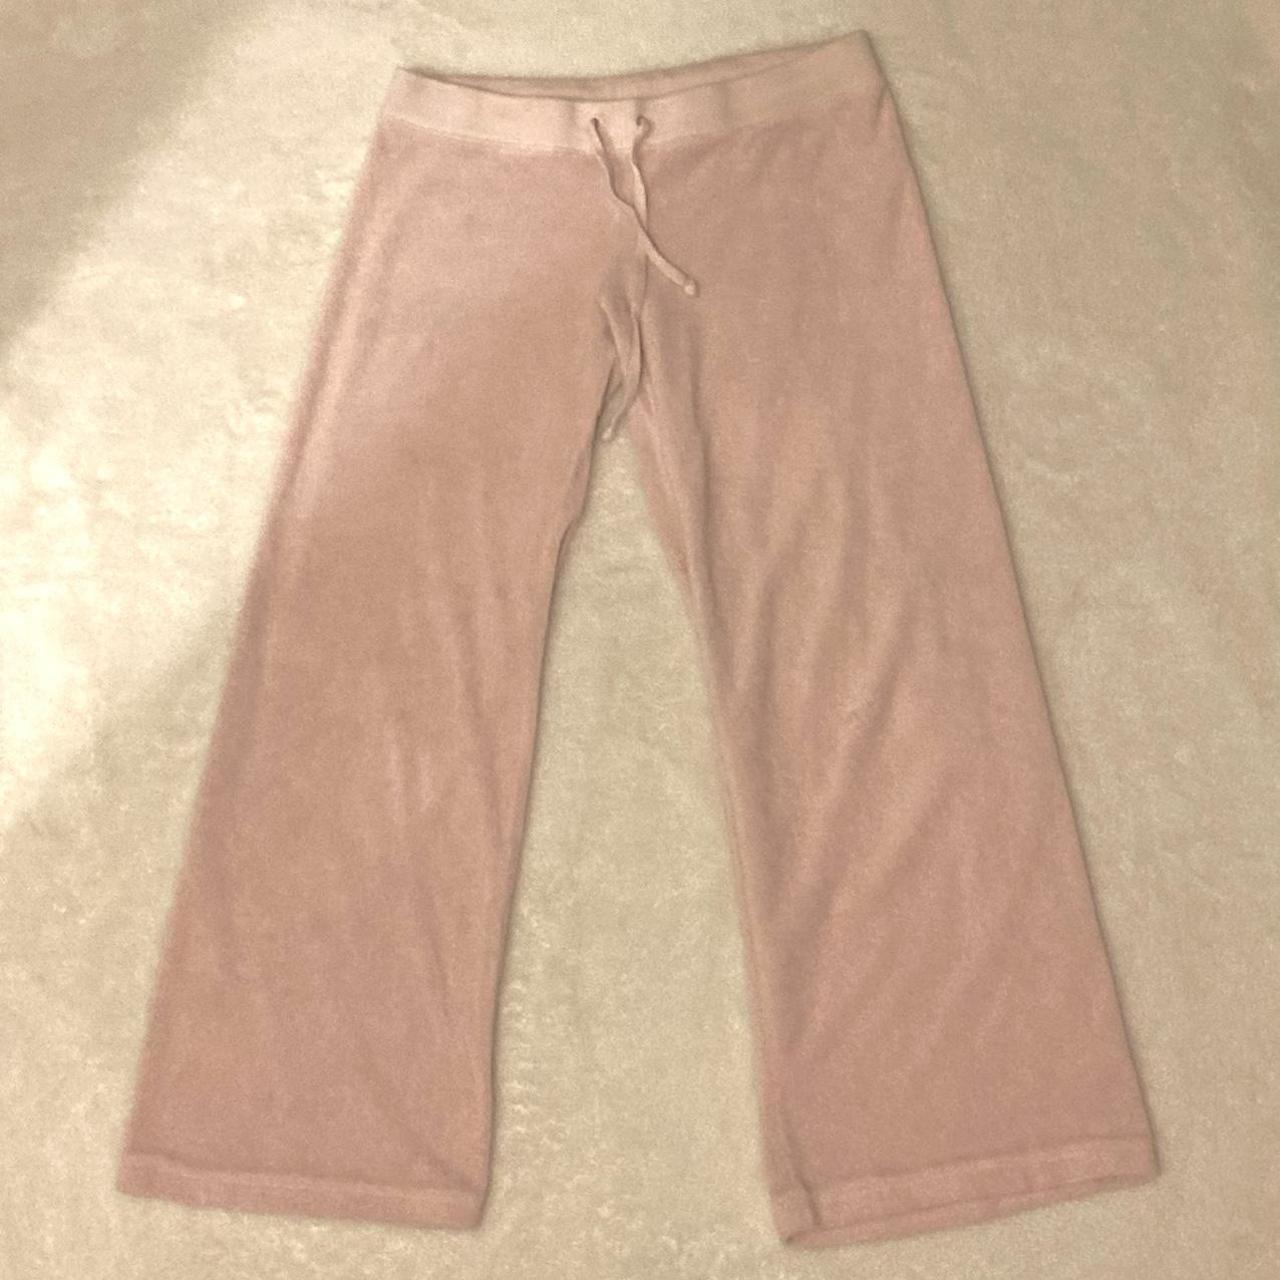 Juicy Couture Women's Pink Joggers-tracksuits | Depop